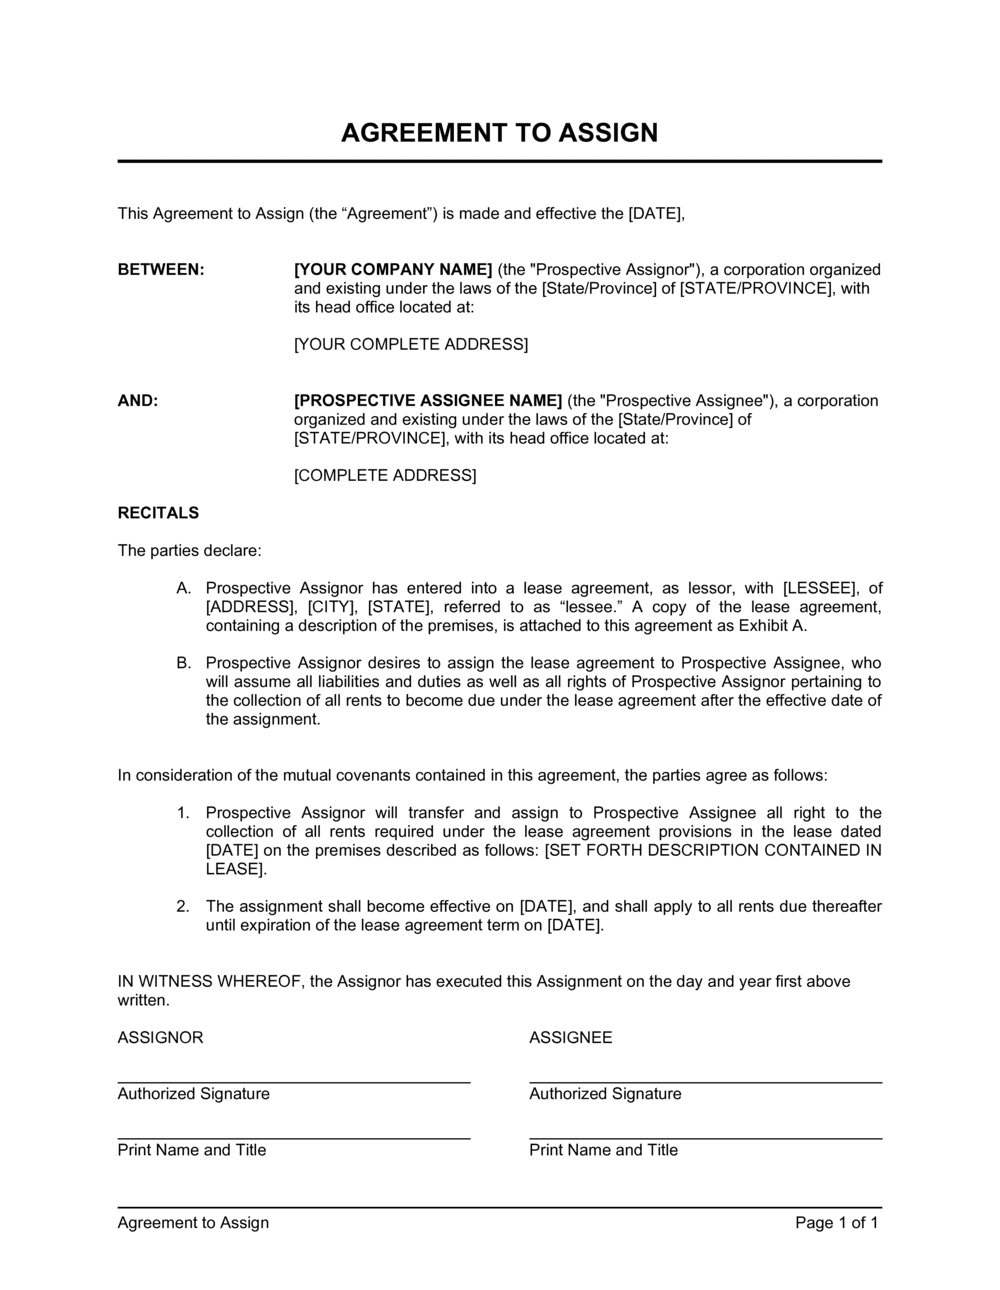 Agreement to Assign Template  by Business-in-a-Box™ In invention assignment agreement template